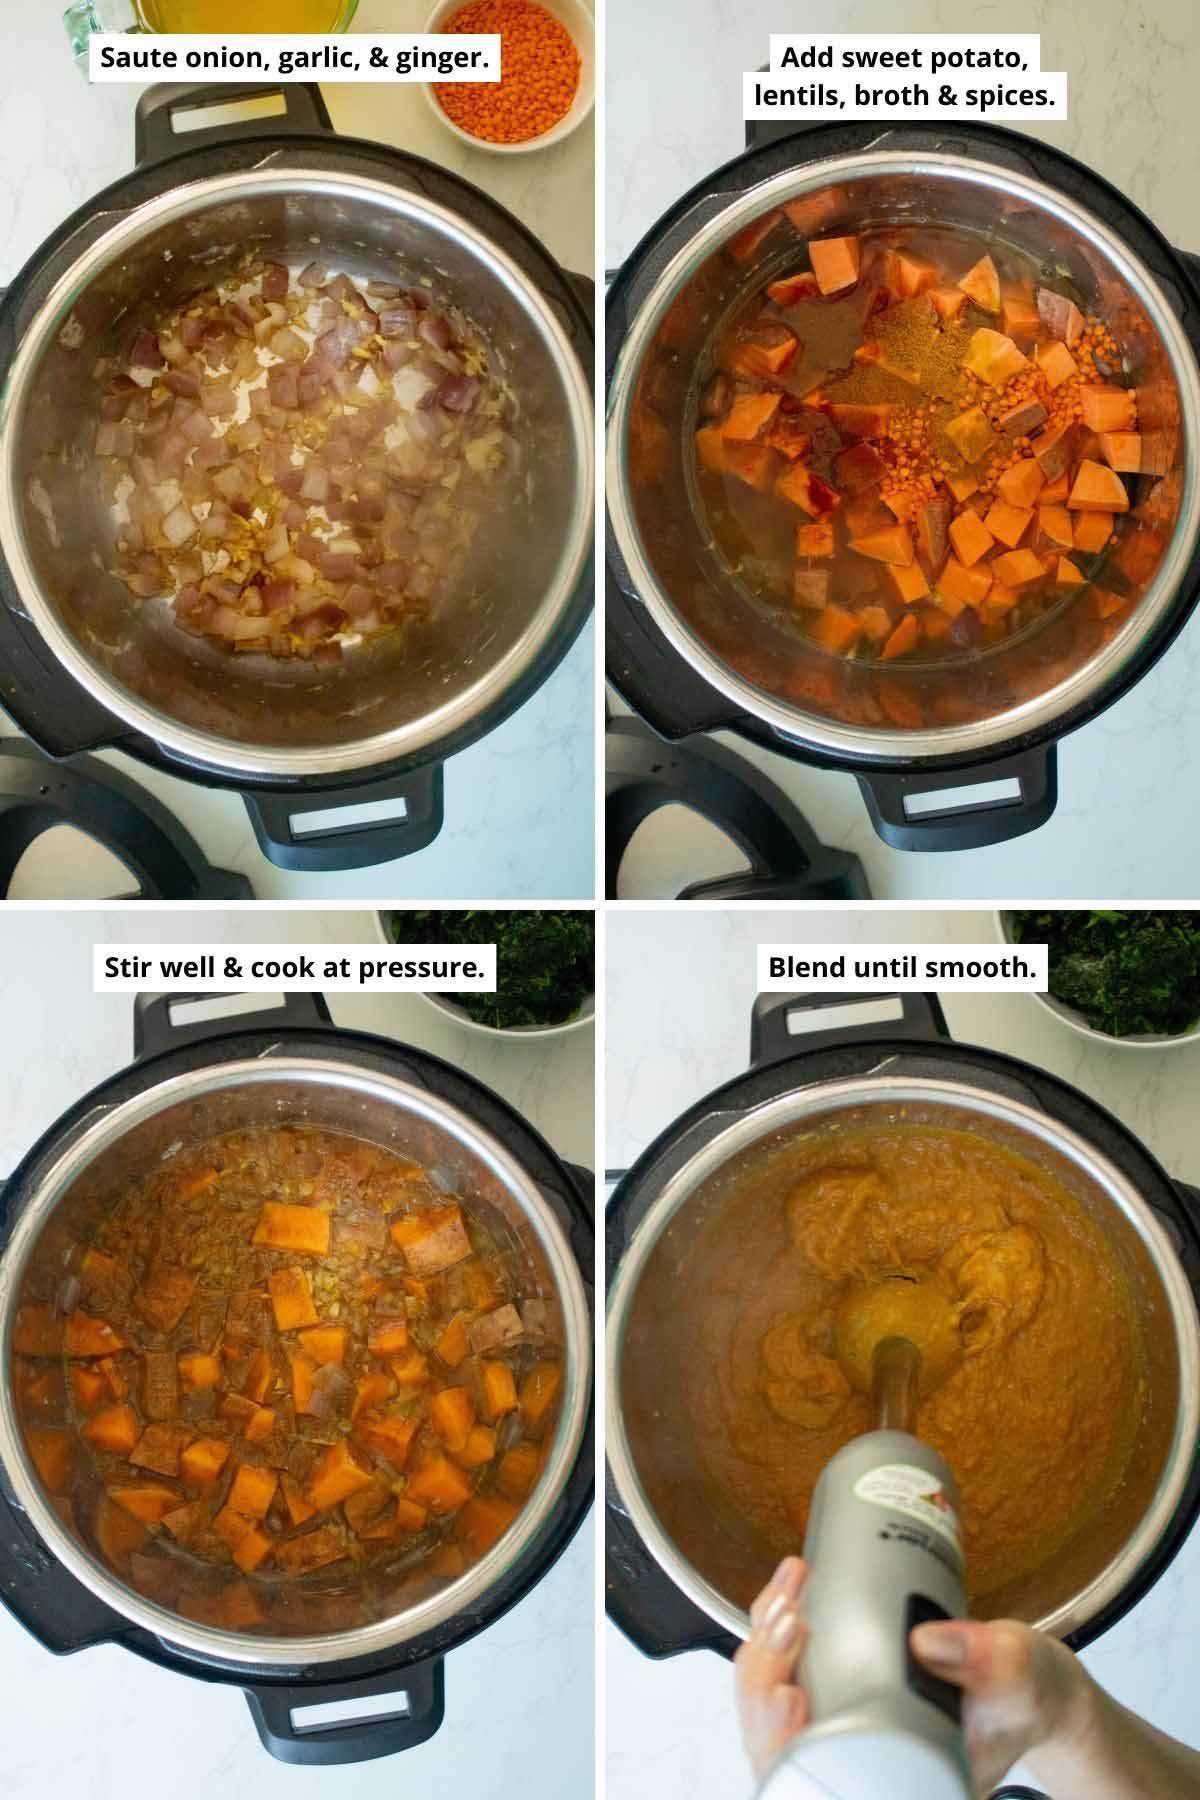 image collage showing sautéed aromatics; adding the sweet potatoes, lentils, and spices to the pot before and after stirring; and using a hand blender to puree the cooked soup